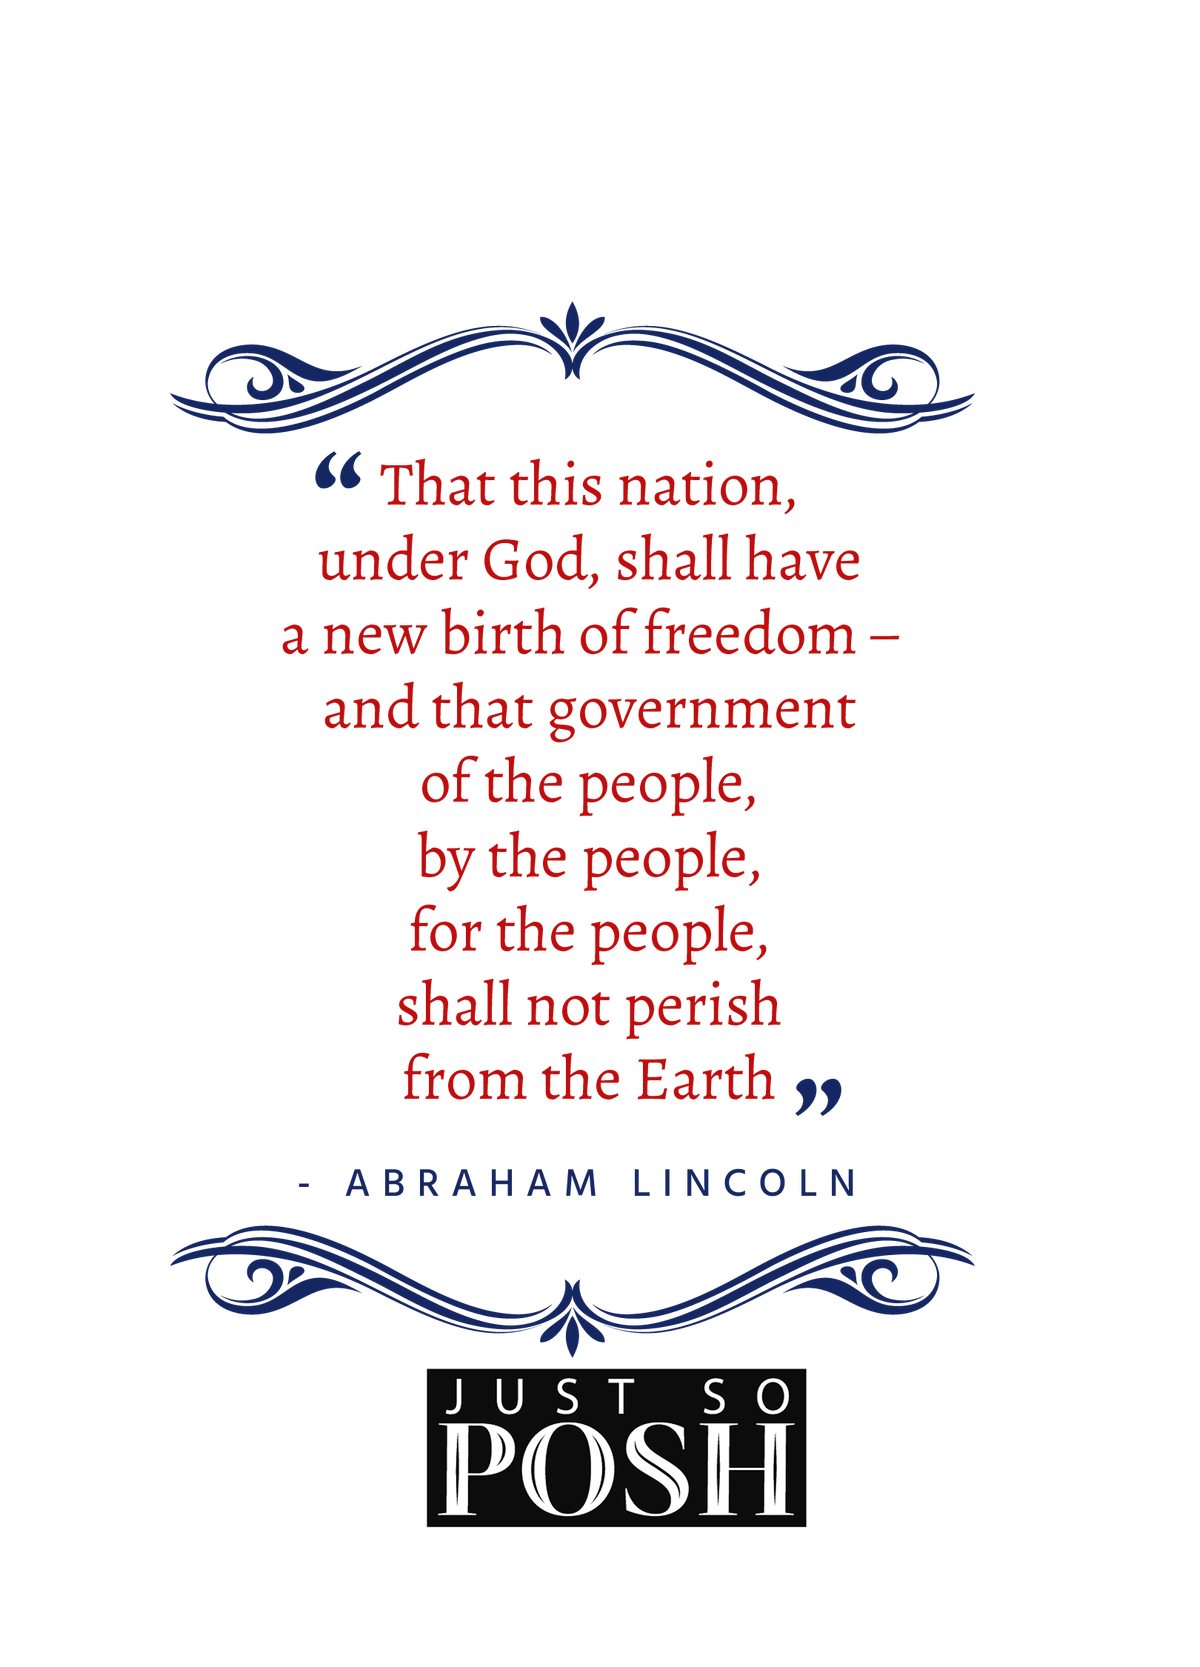 Famous Quotes Journal - Abraham Lincoln - Back View